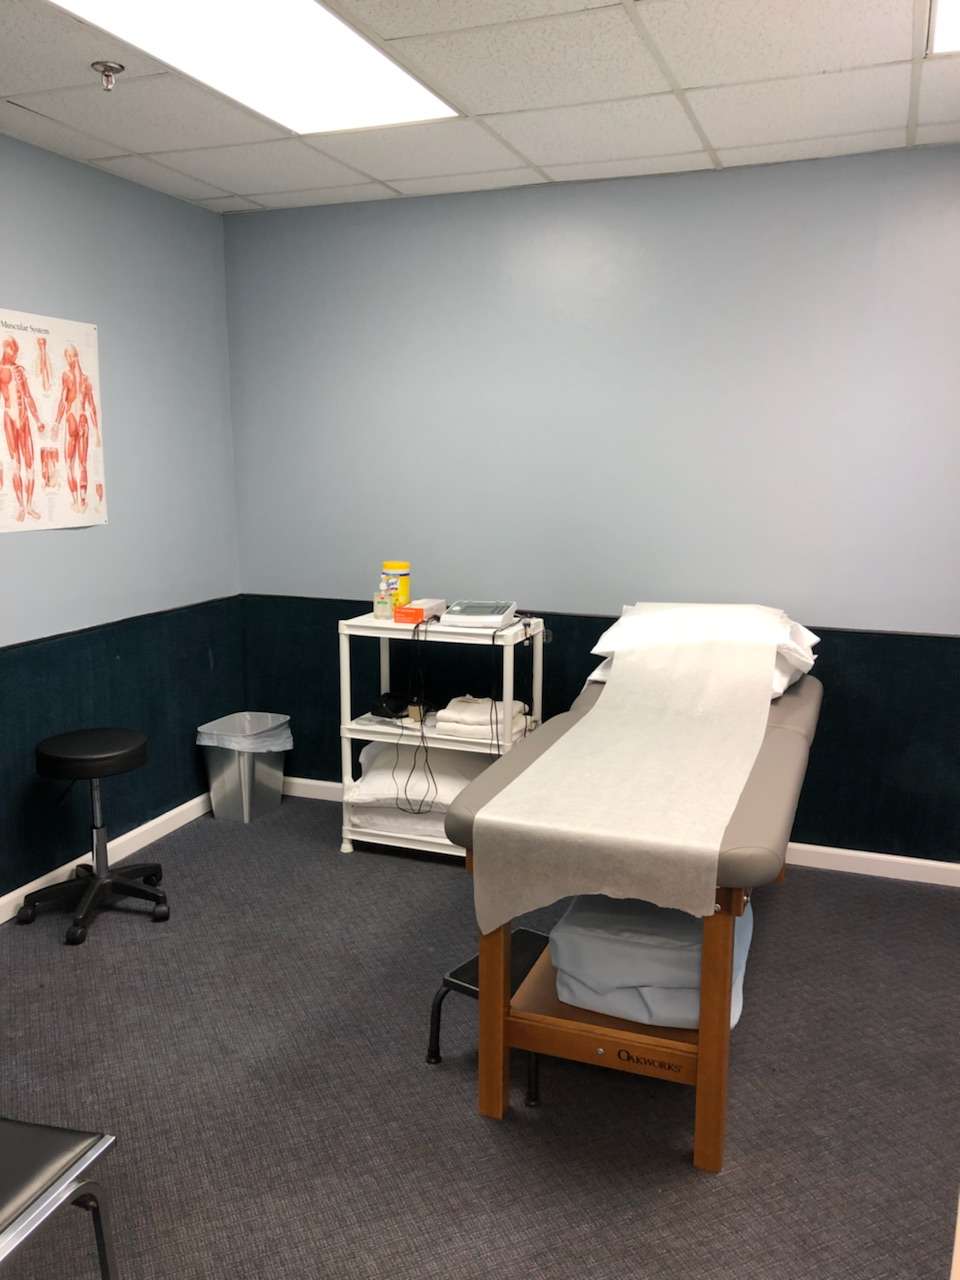 Mancini Physical Therapy | 375 Commack Rd, Deer Park, NY 11729, USA | Phone: (631) 522-1955